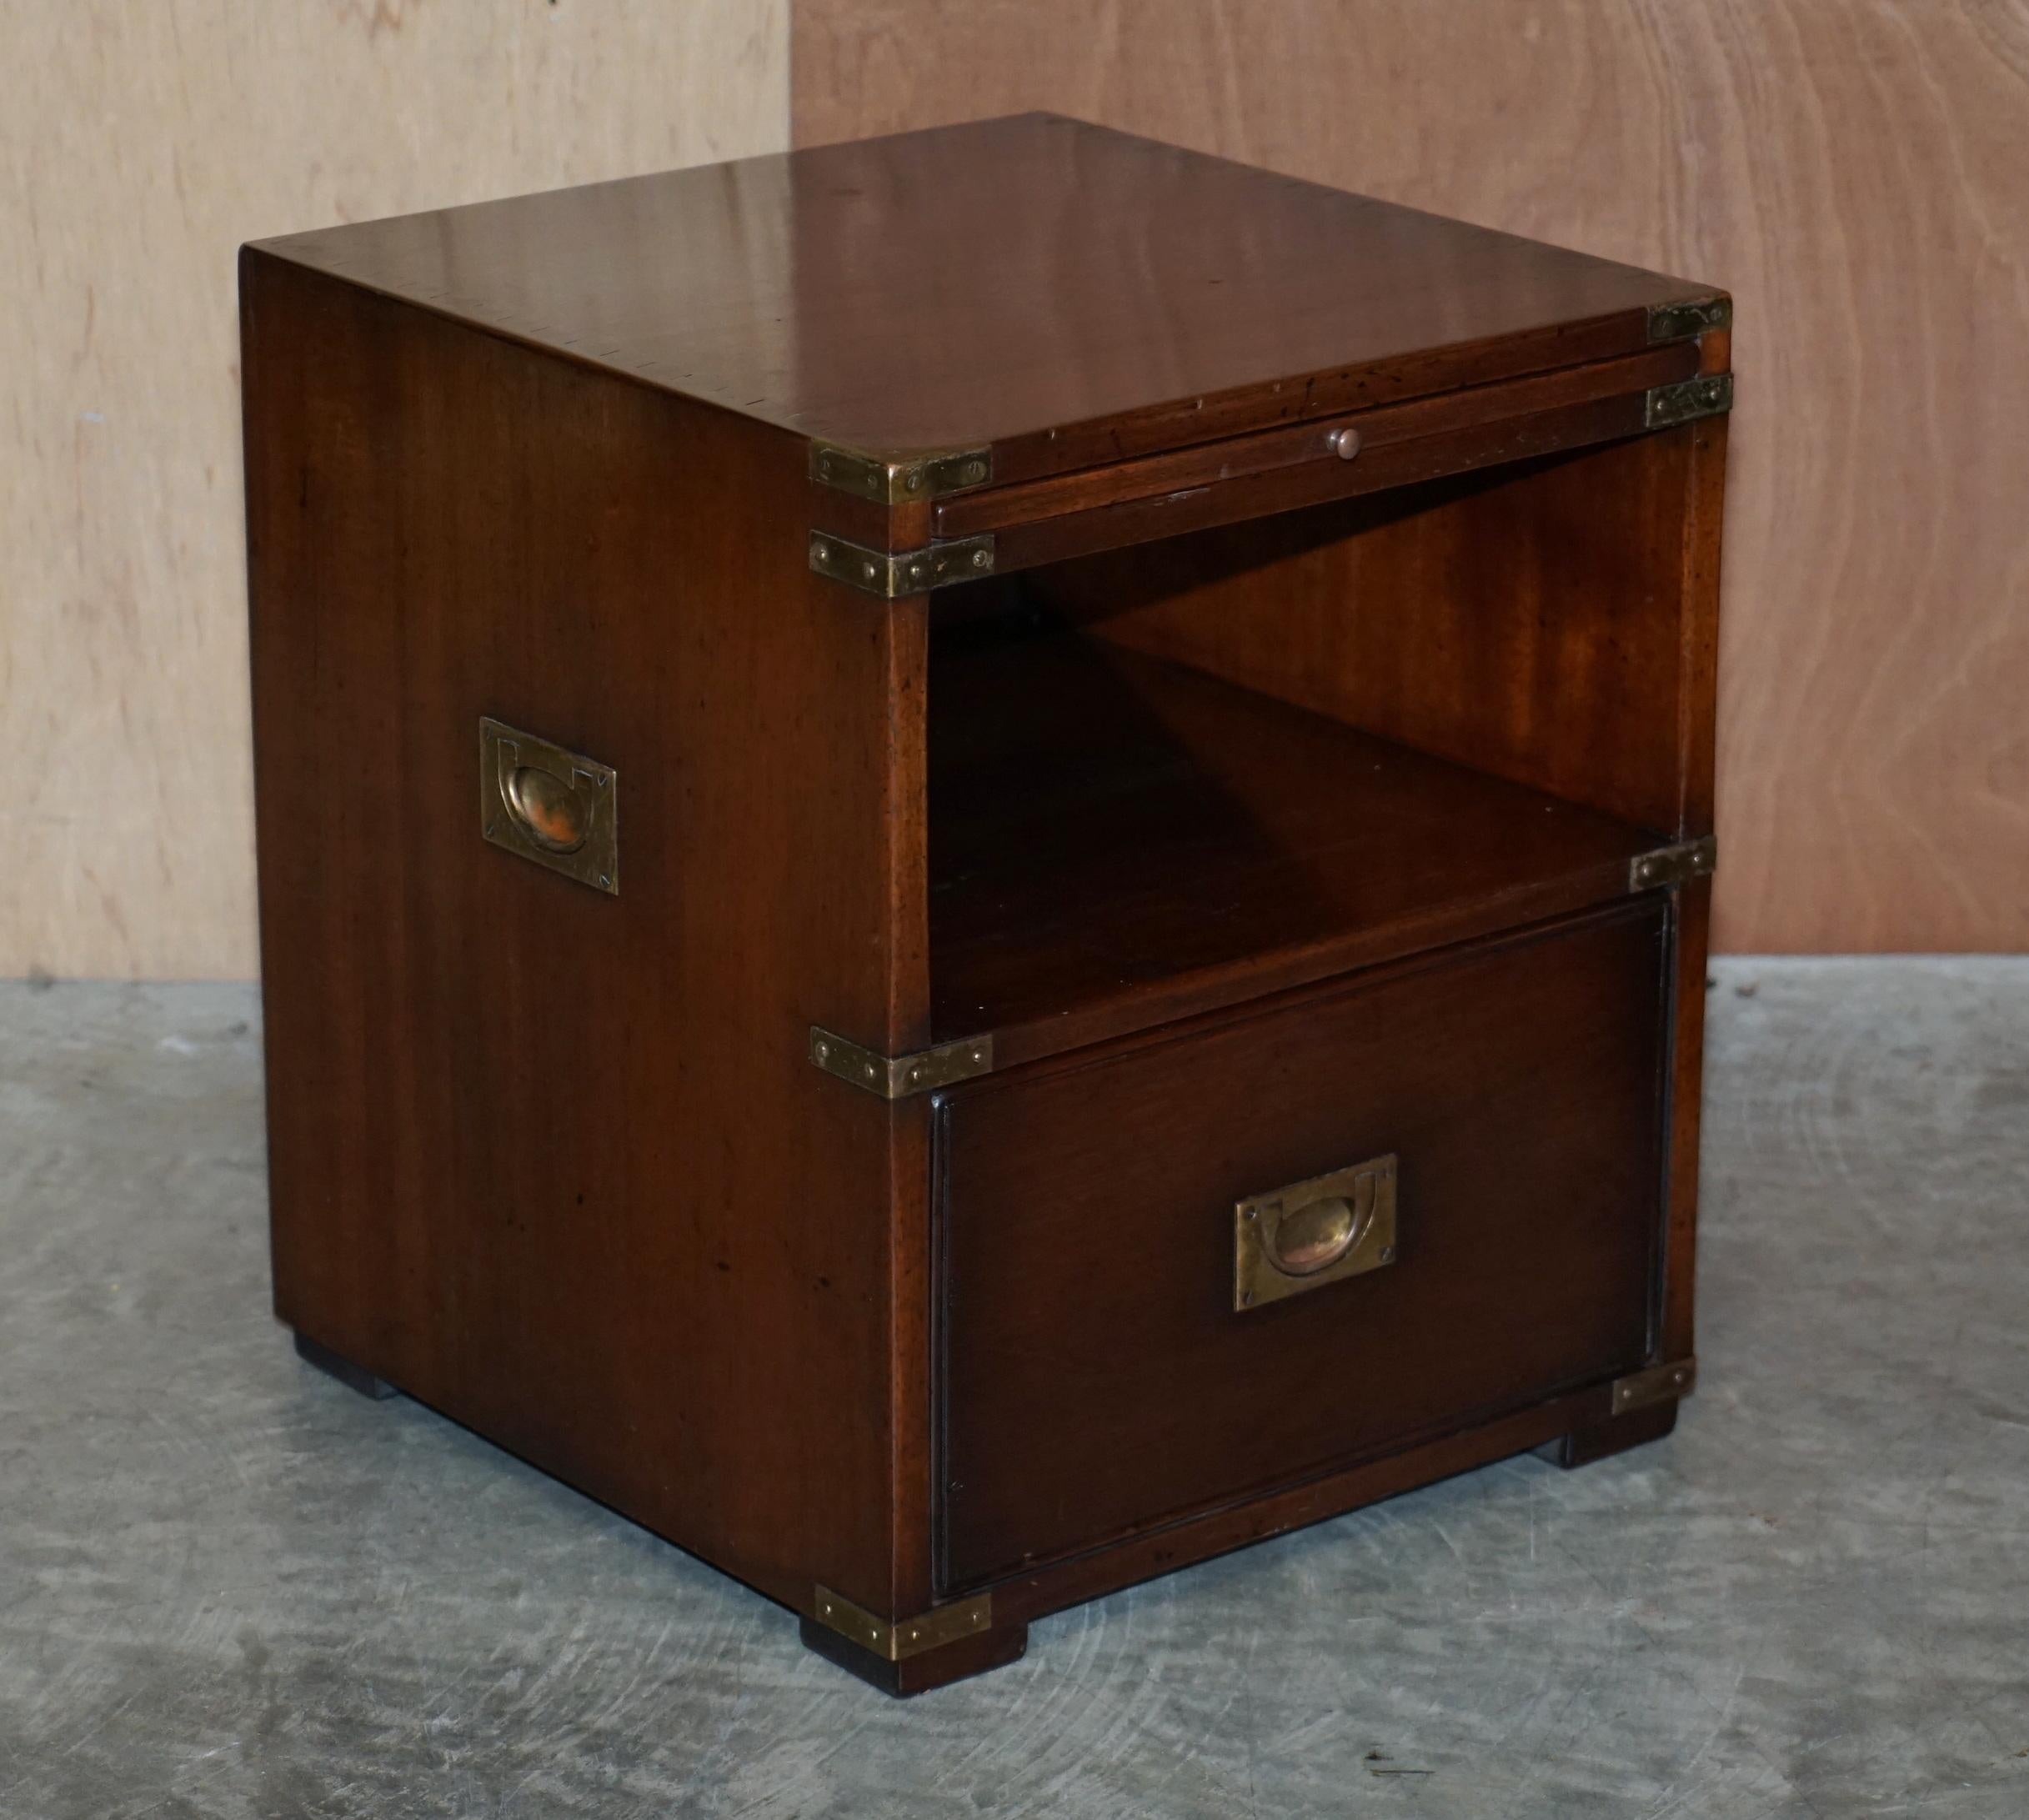 We are delighted to offer for sale this lovely pair of vintage mahogany with brass fittings military campaign side table drawers made by R.E.H Kennedy and retailed through Harrods London with butlers serving slip shelves 

A very good looking and